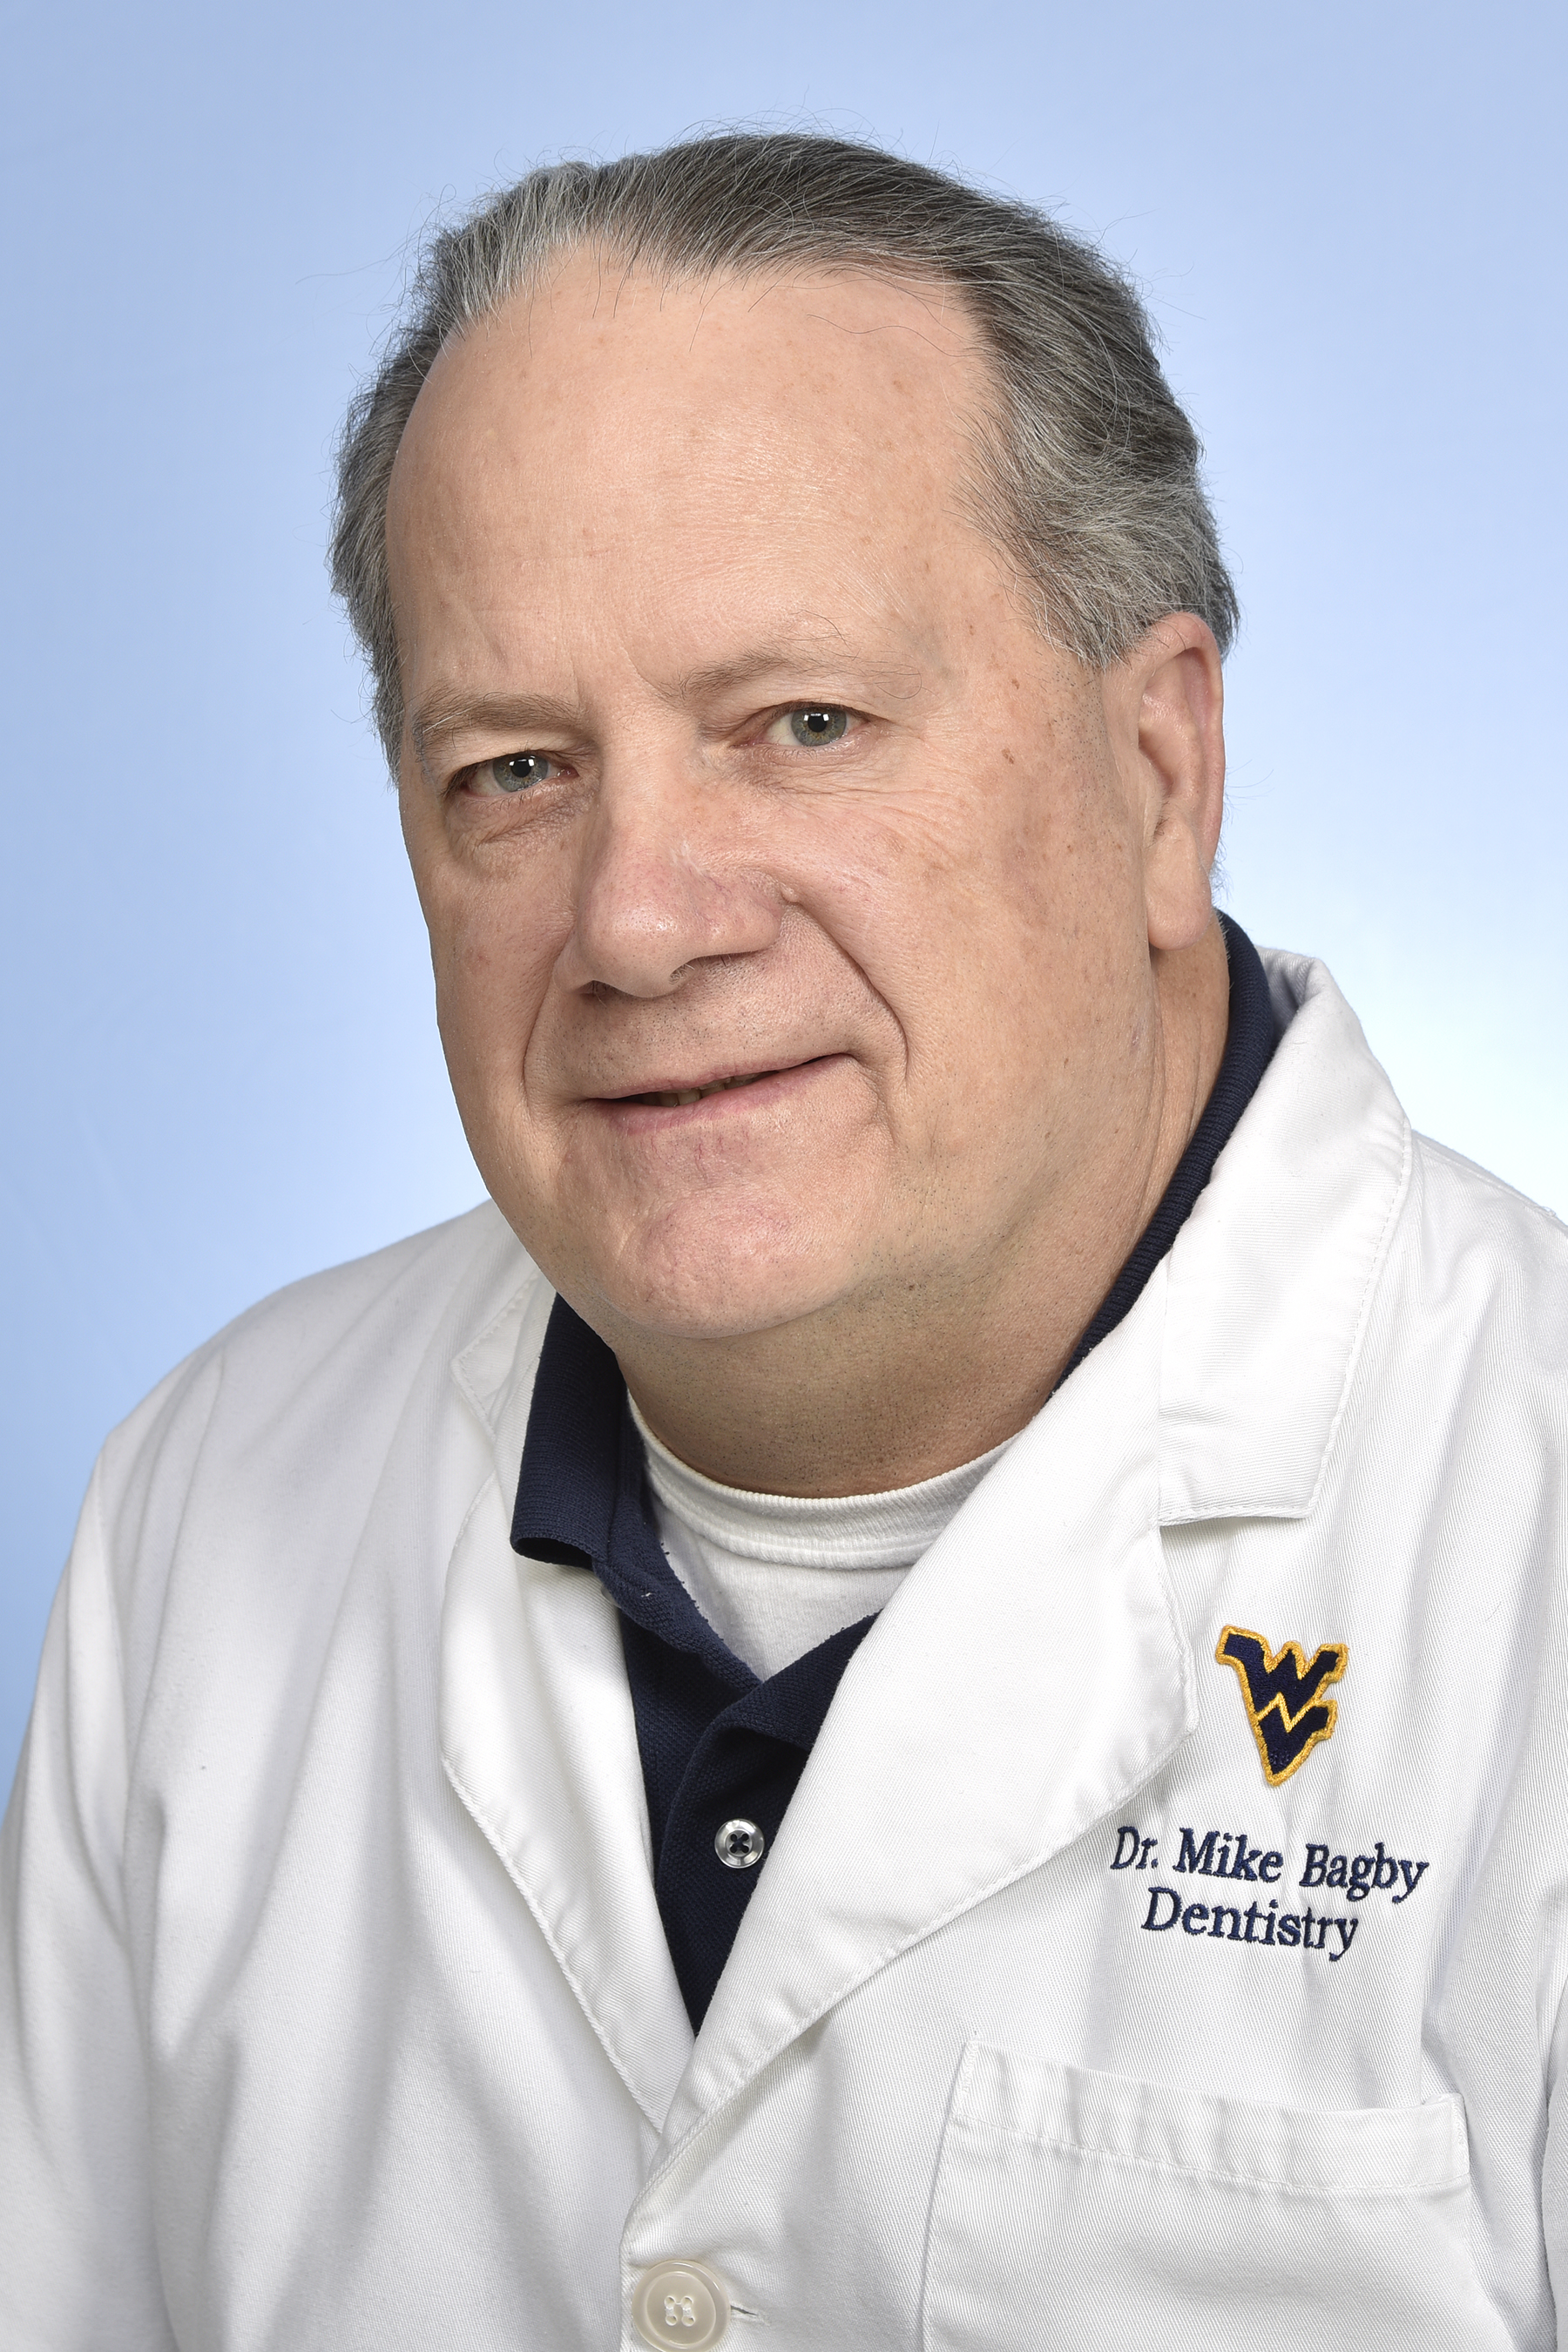 Dr. Mike Bagby was selected as the Mountaineer curiosity value coin recipient.